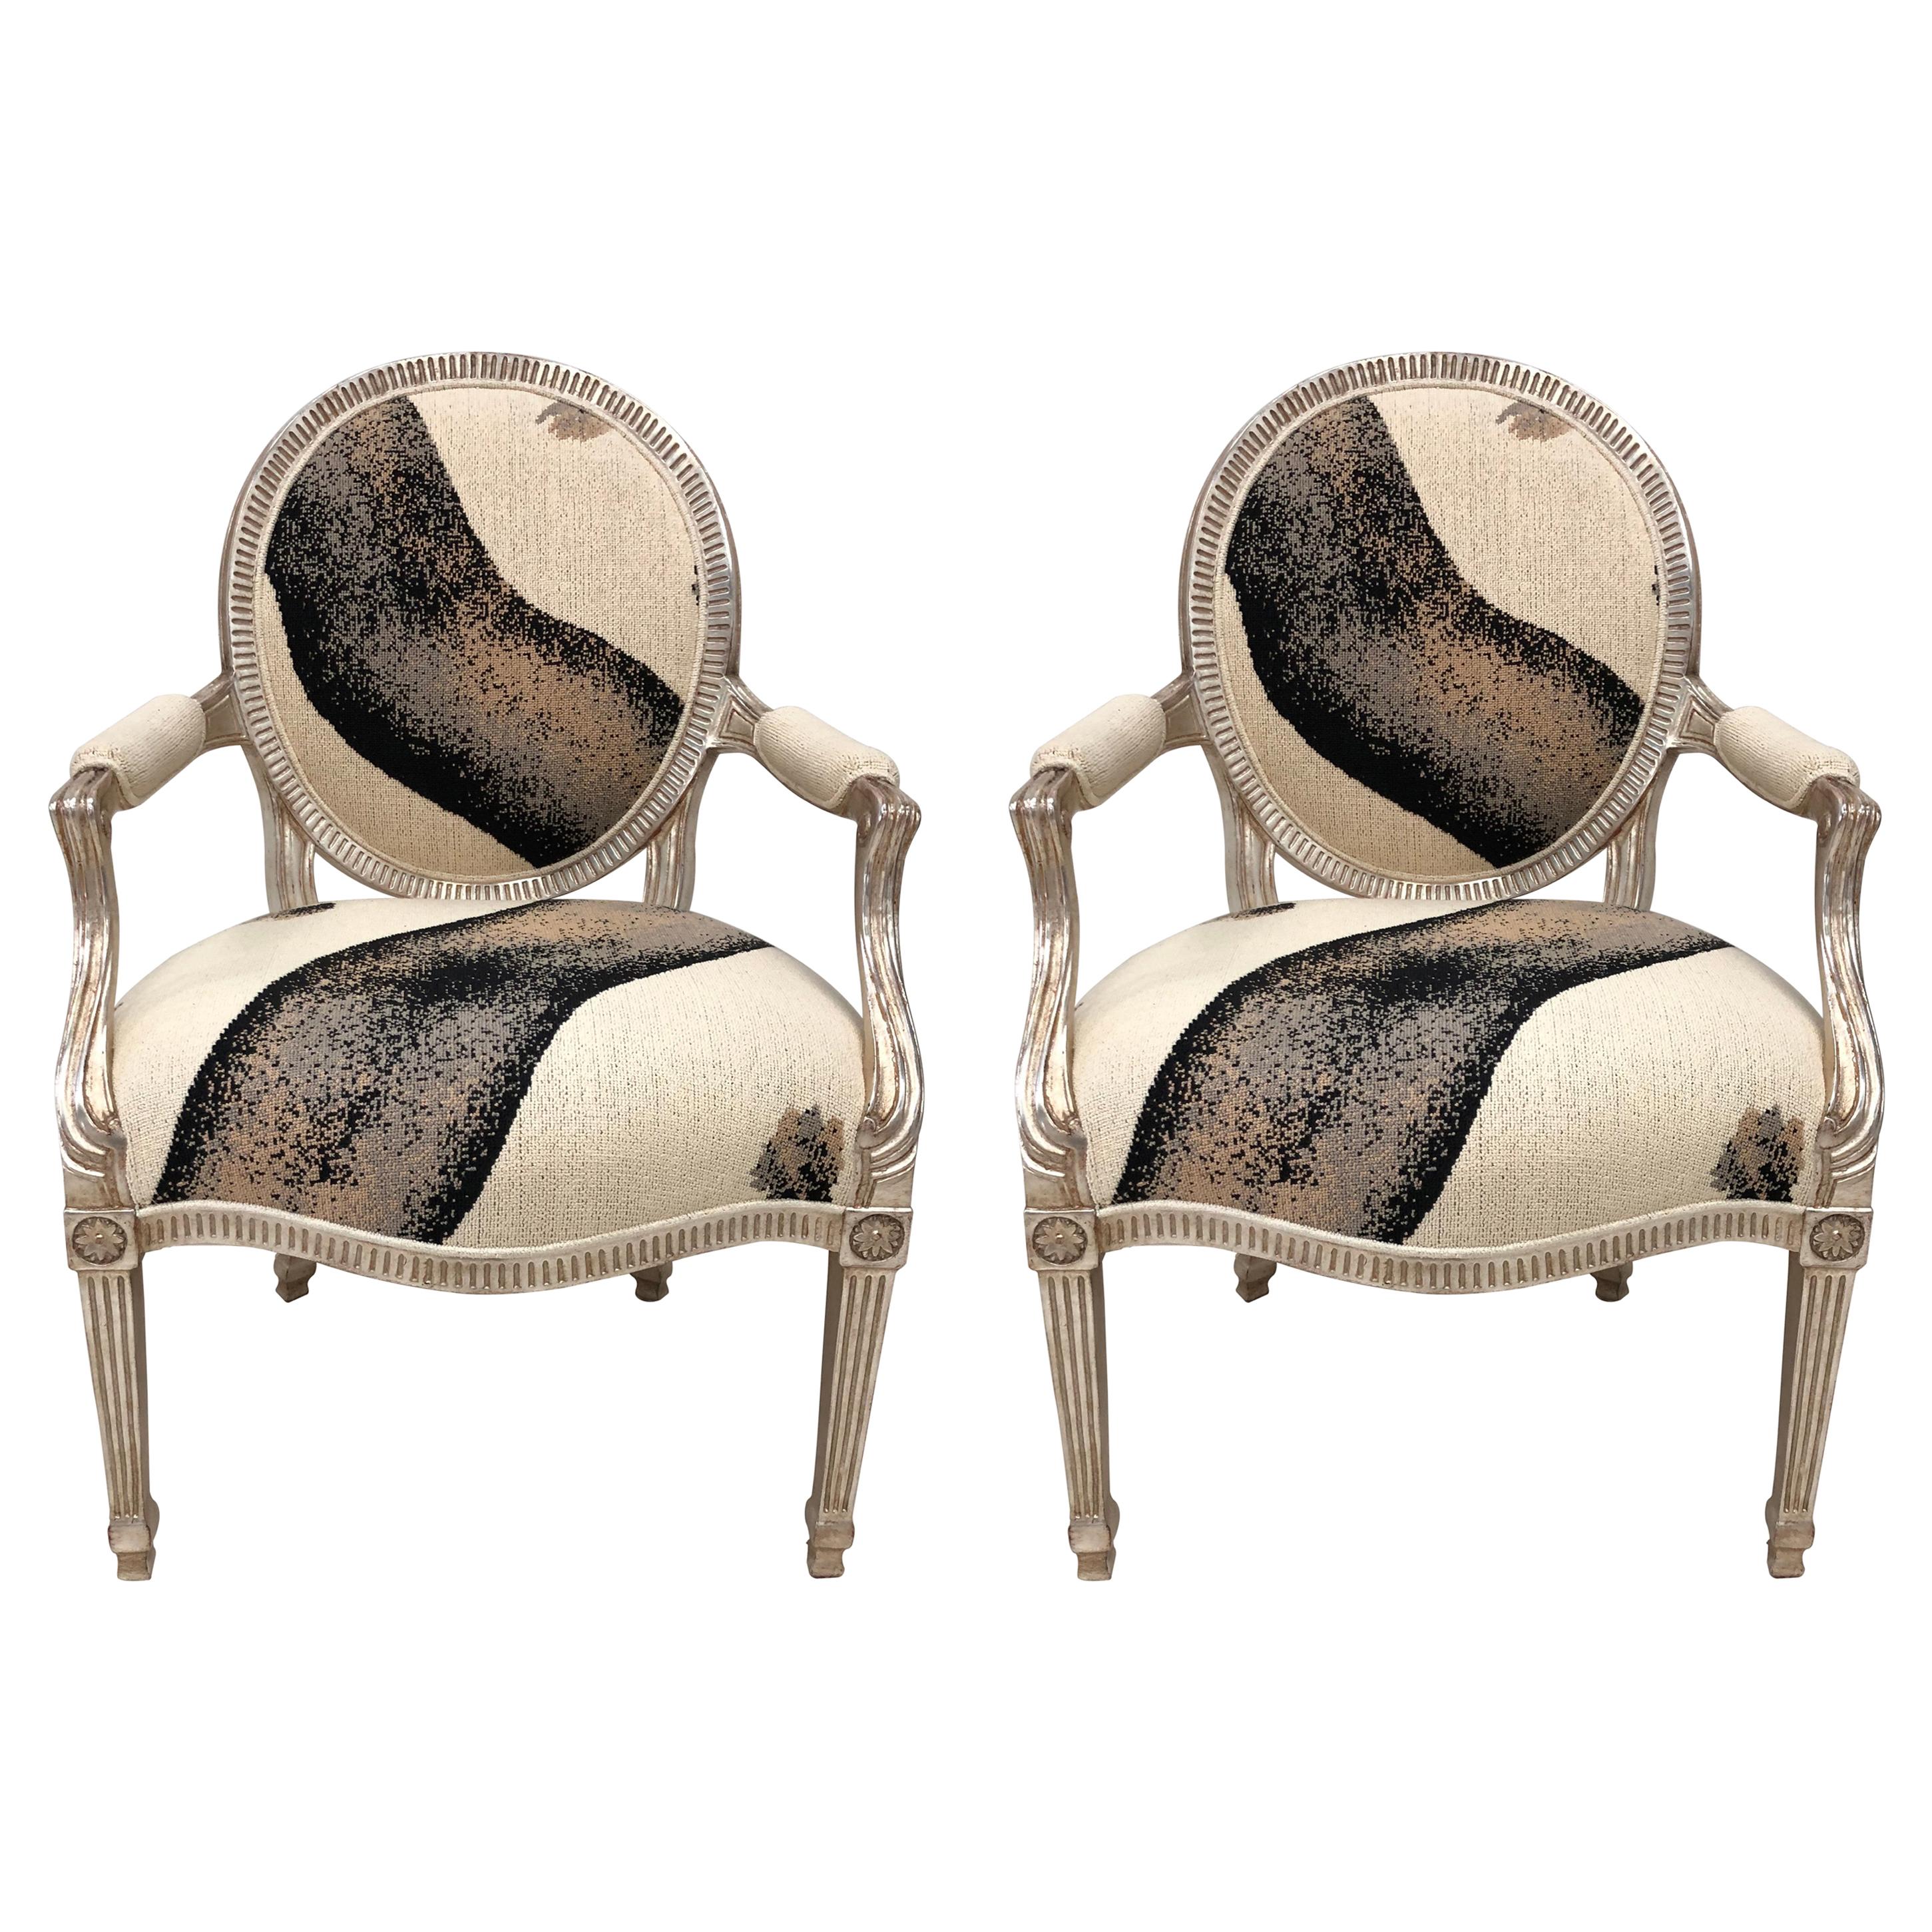 Pair of J. Robert Scott Louis XVI Style French Fauteuil Arm Chairs